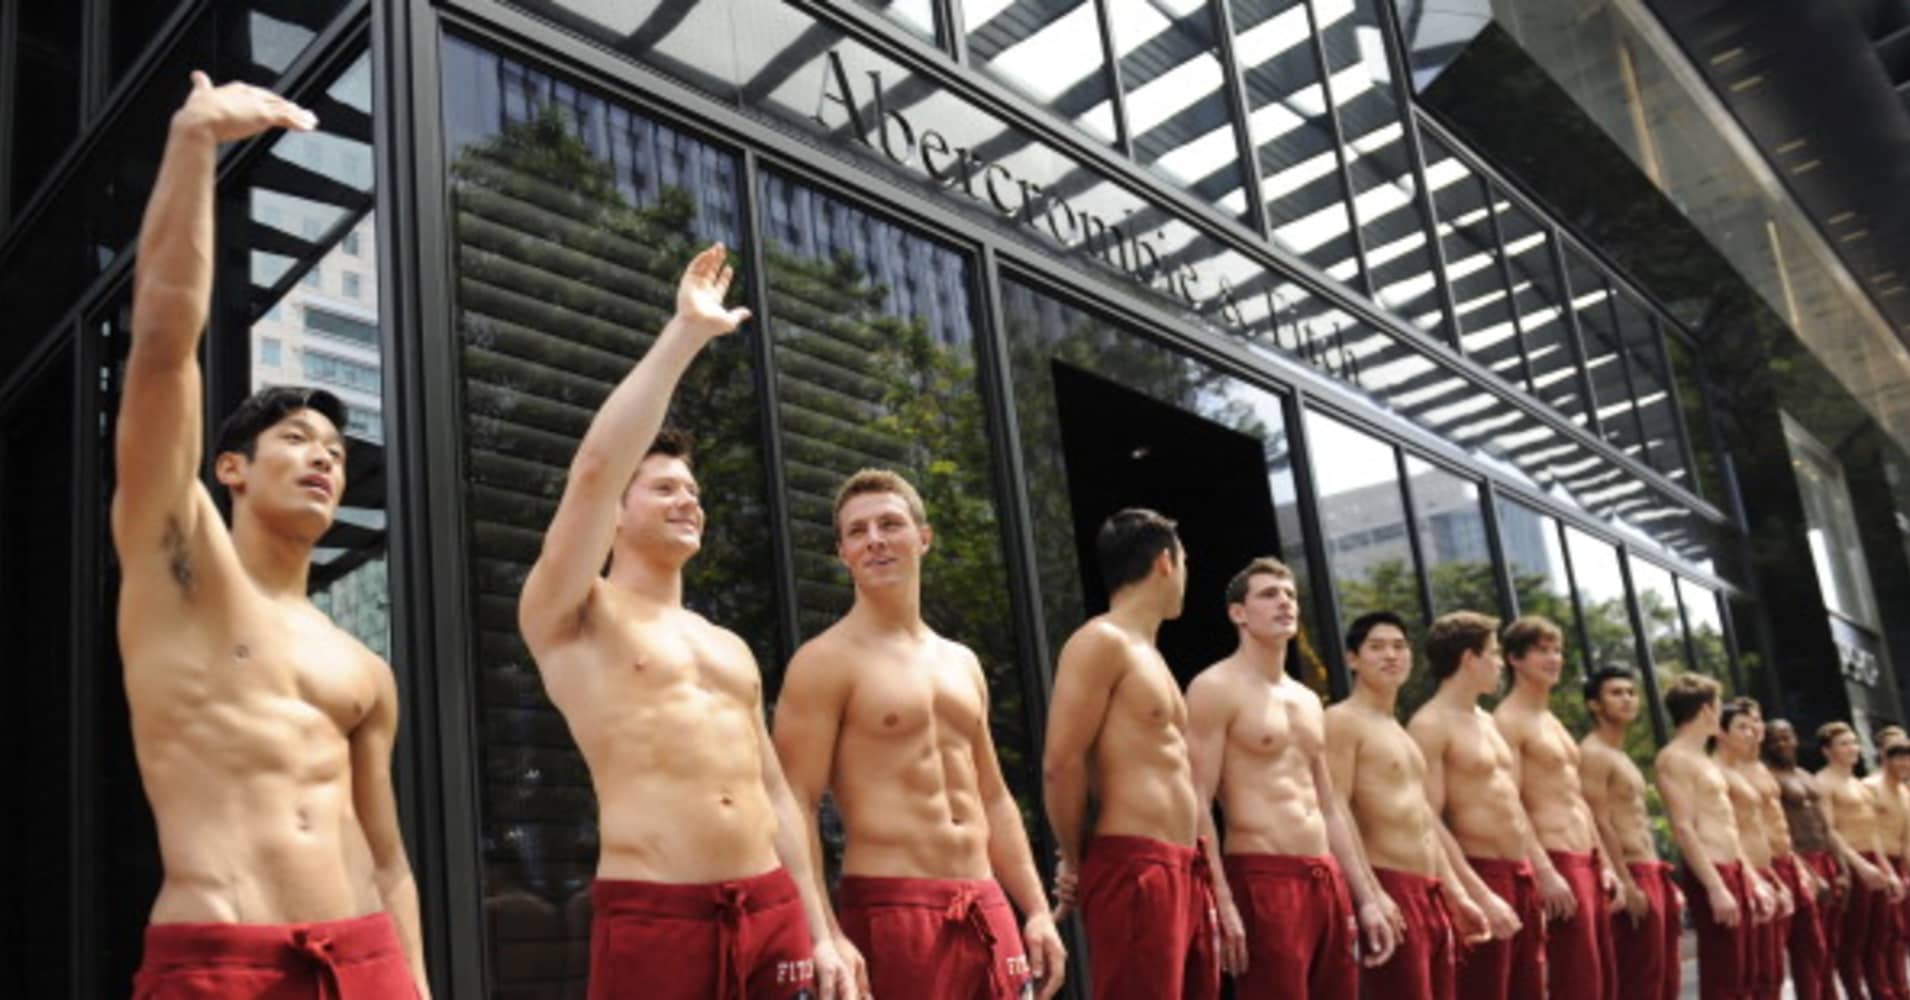 Abercrombie hiring of hot staff challenged in Europe